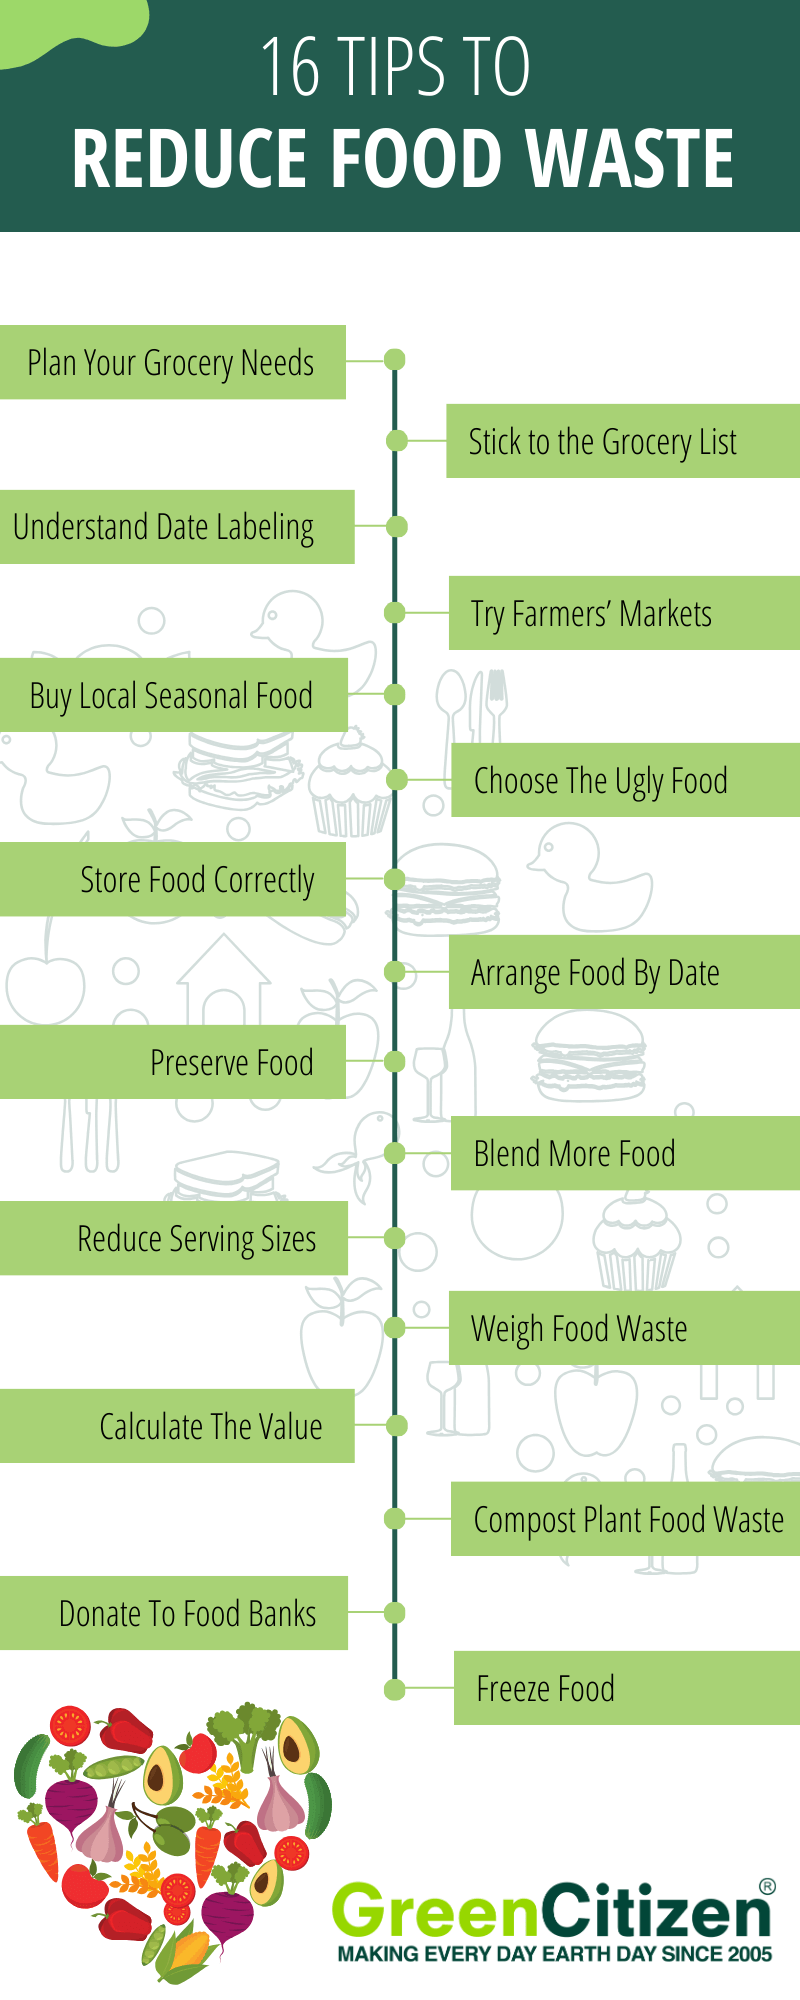 16 Tips to Reduce Food Waste